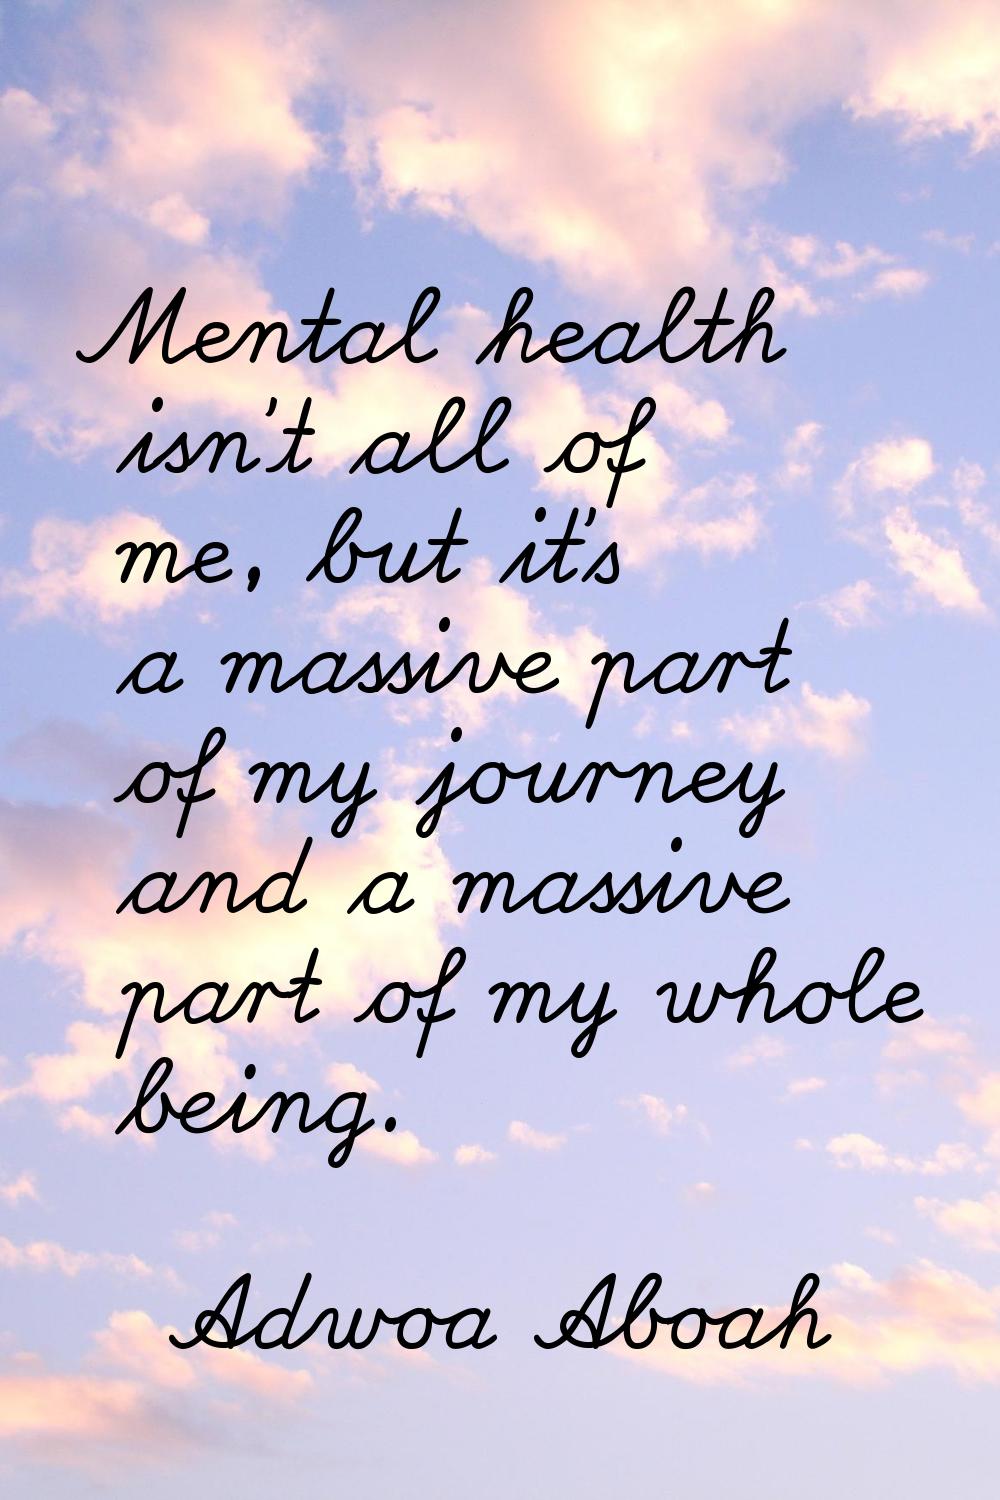 Mental health isn't all of me, but it's a massive part of my journey and a massive part of my whole